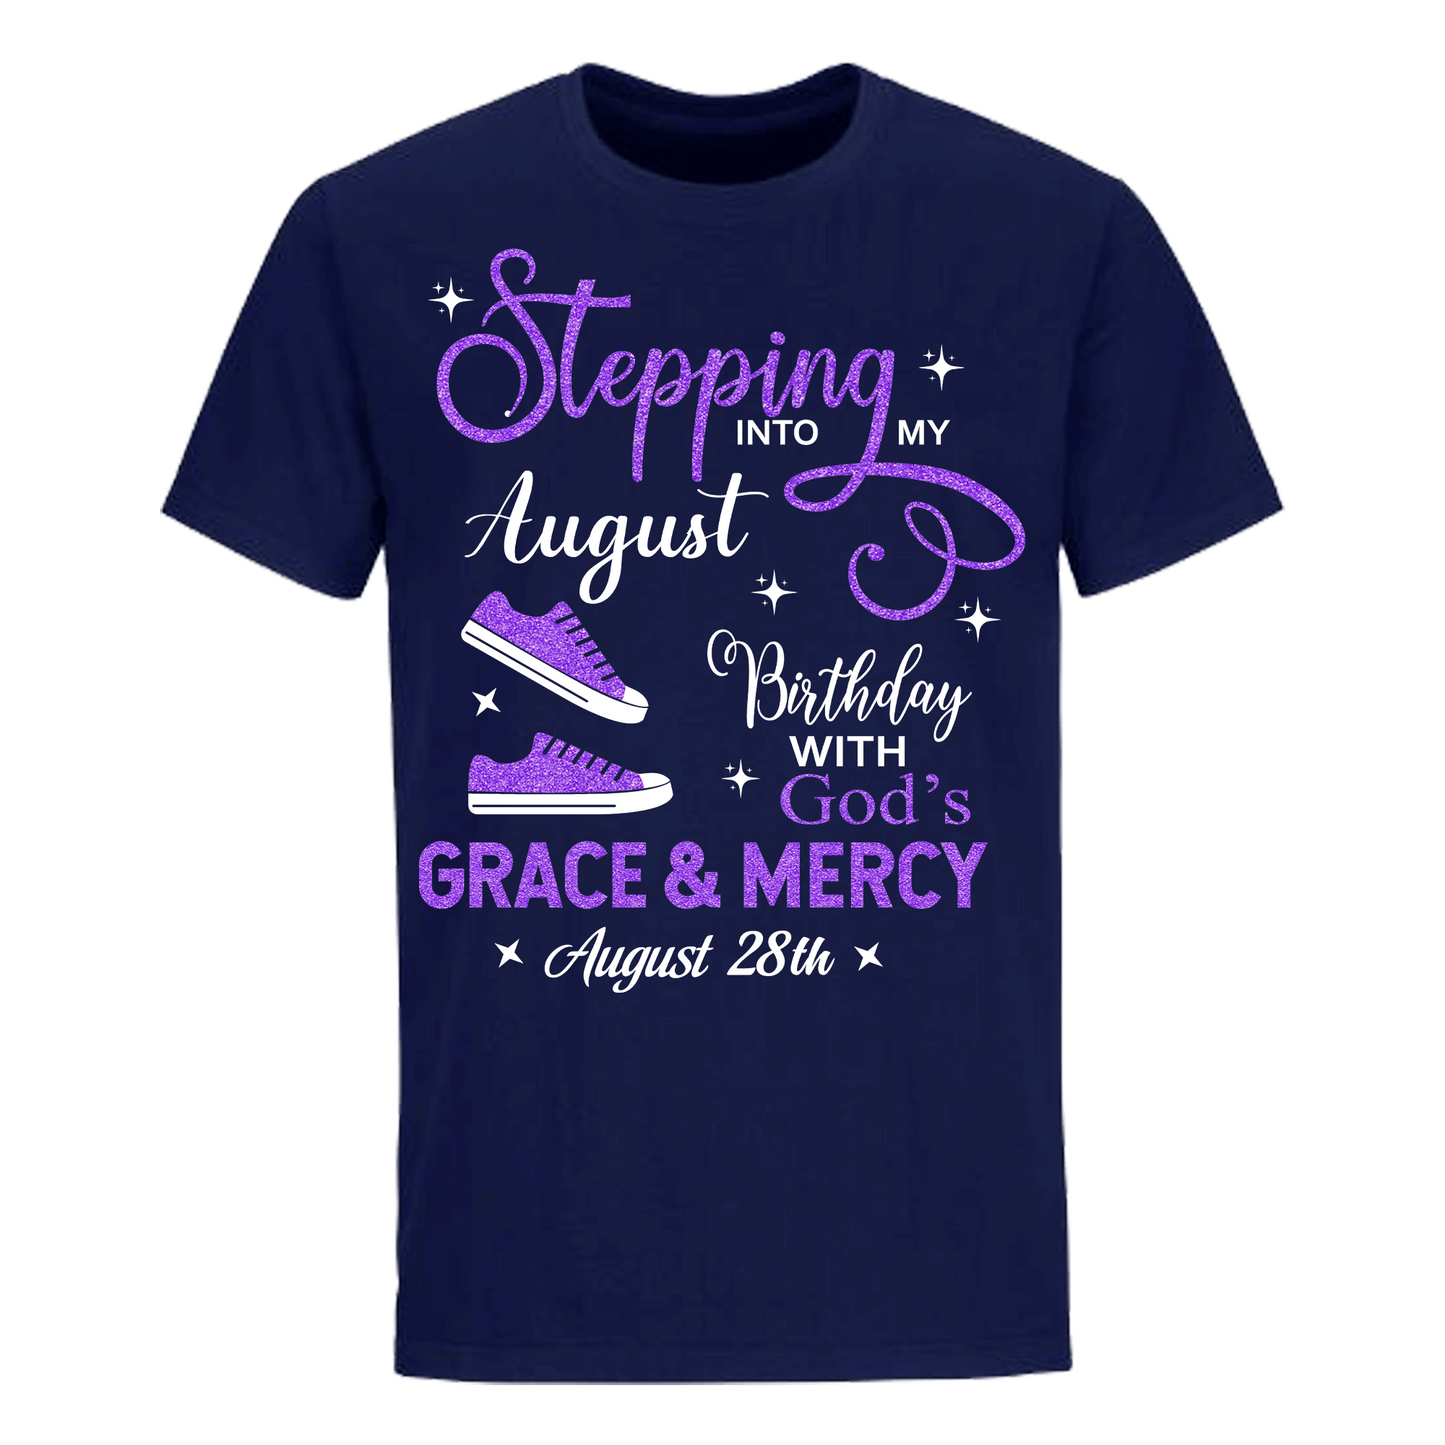 AUGUST 28 GRACE AND MERCY